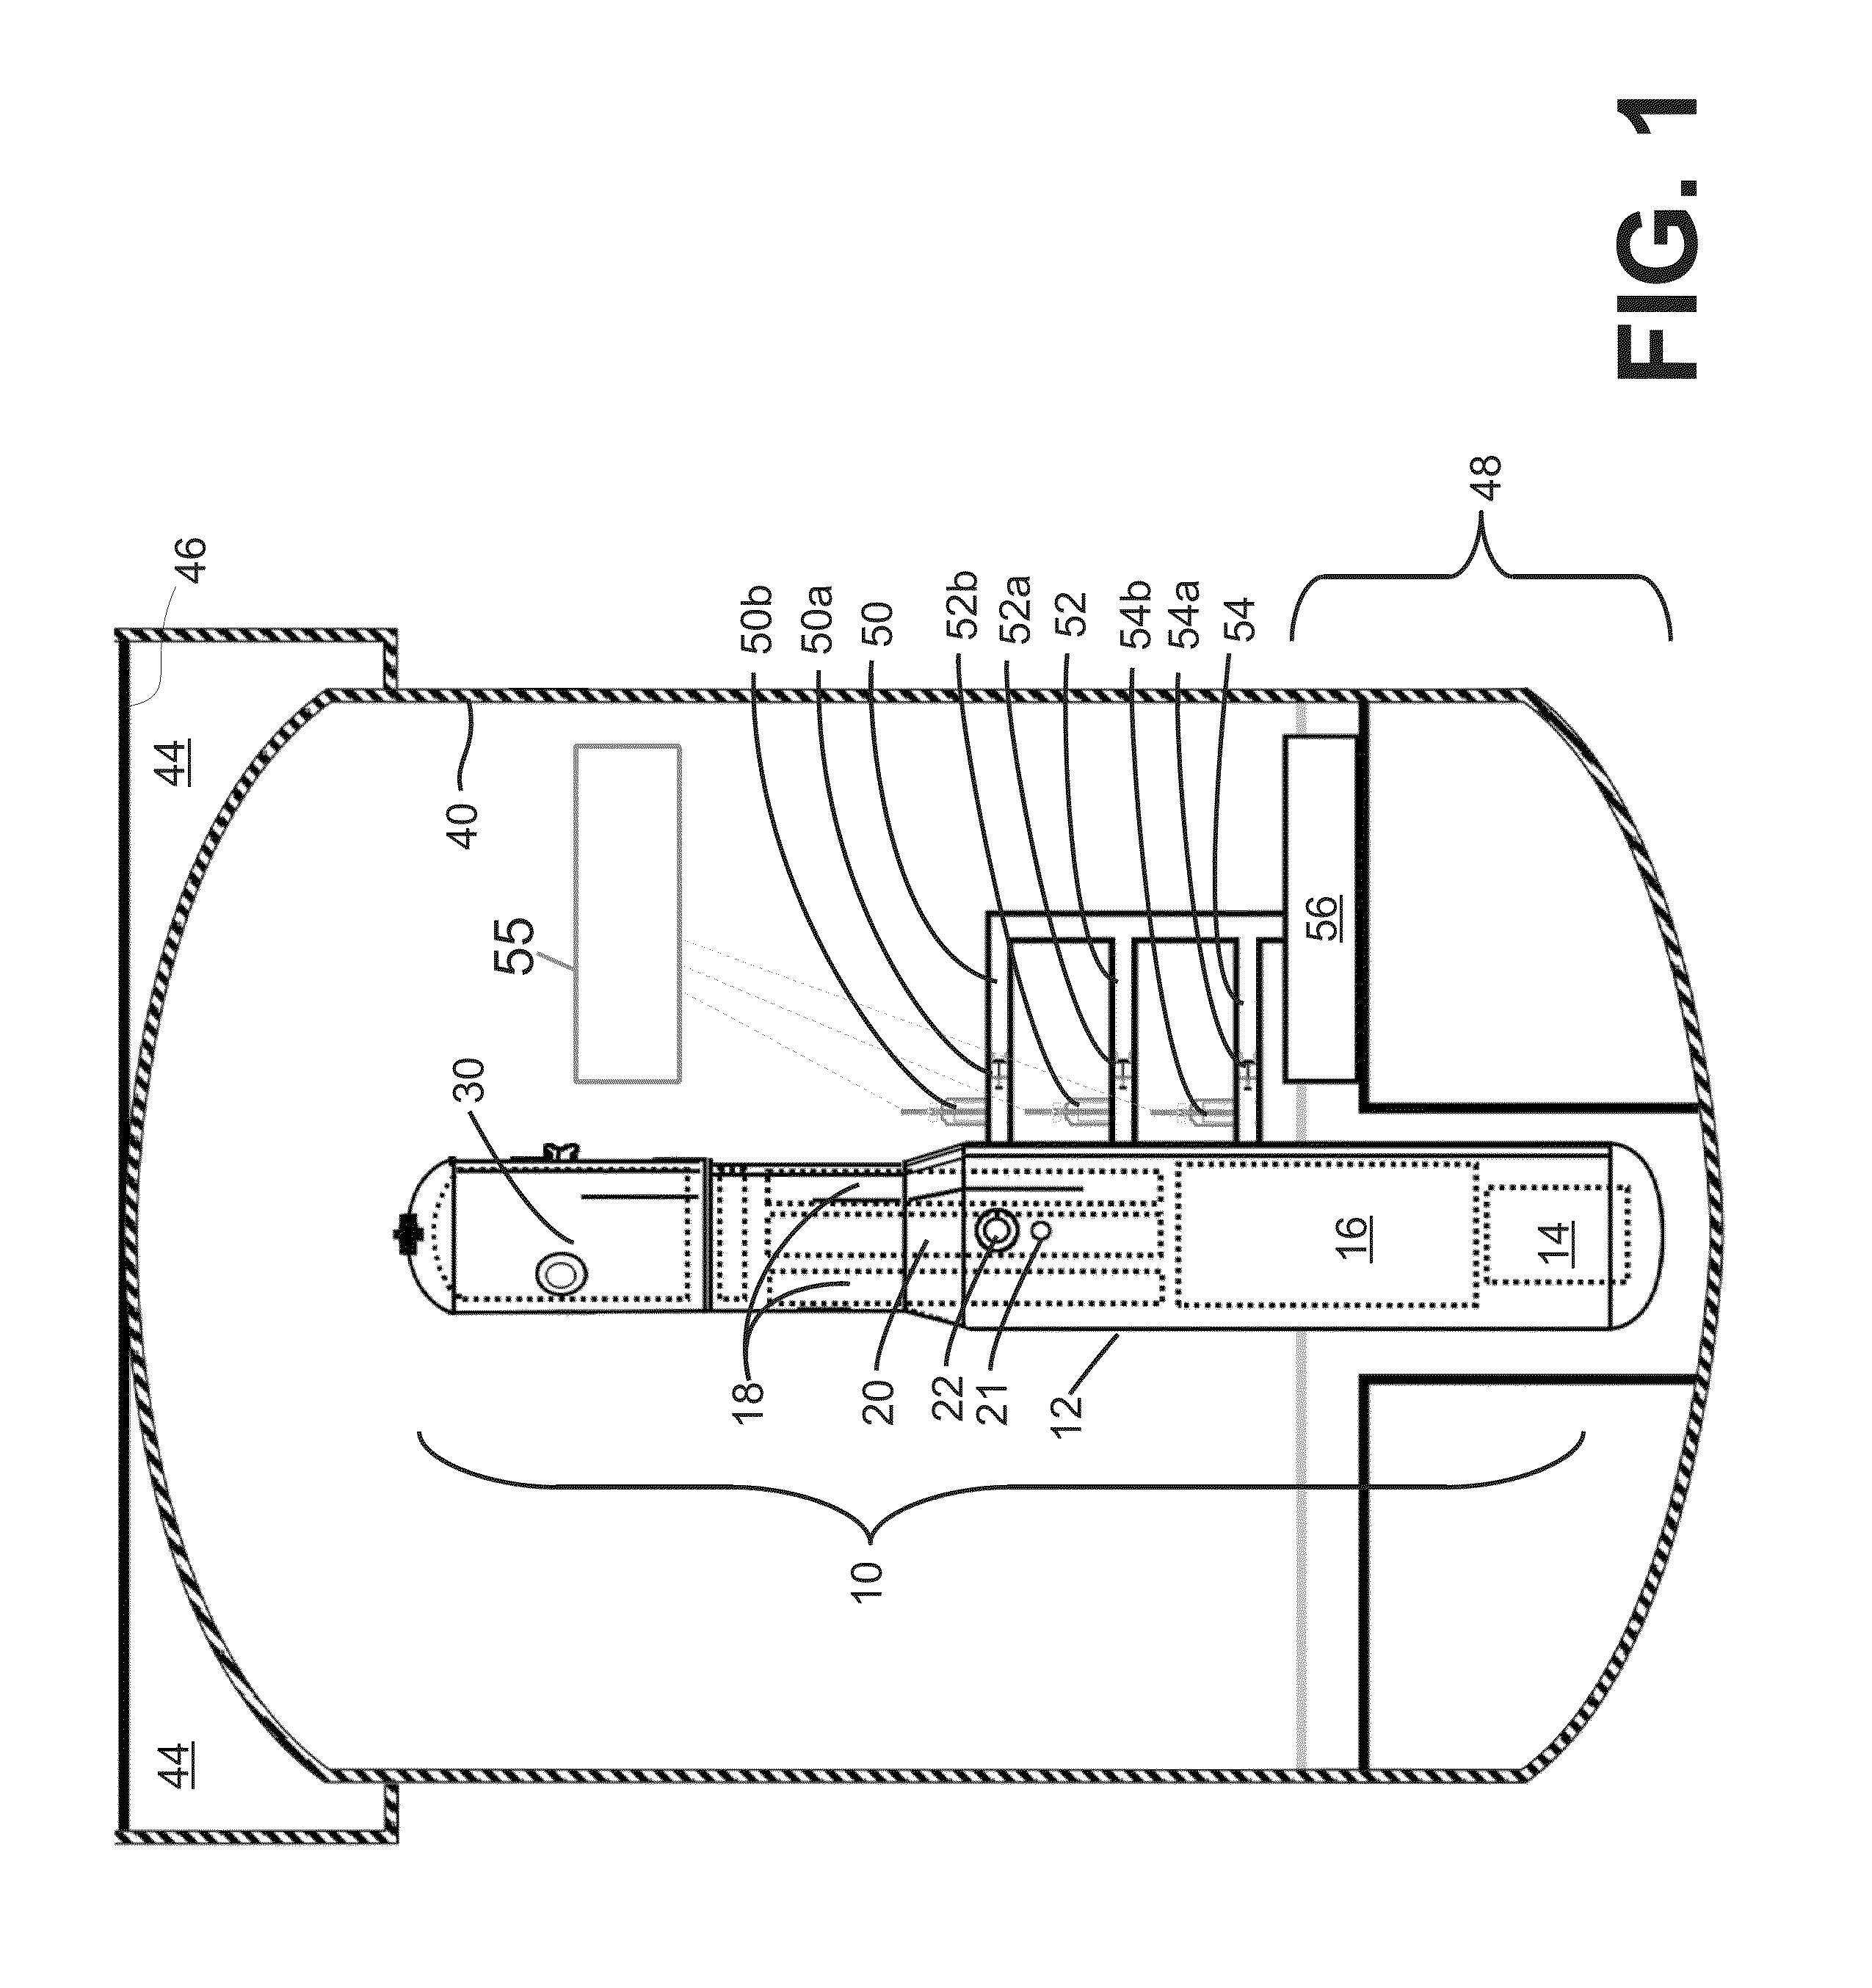 Passively initiated depressurization for light water reactor